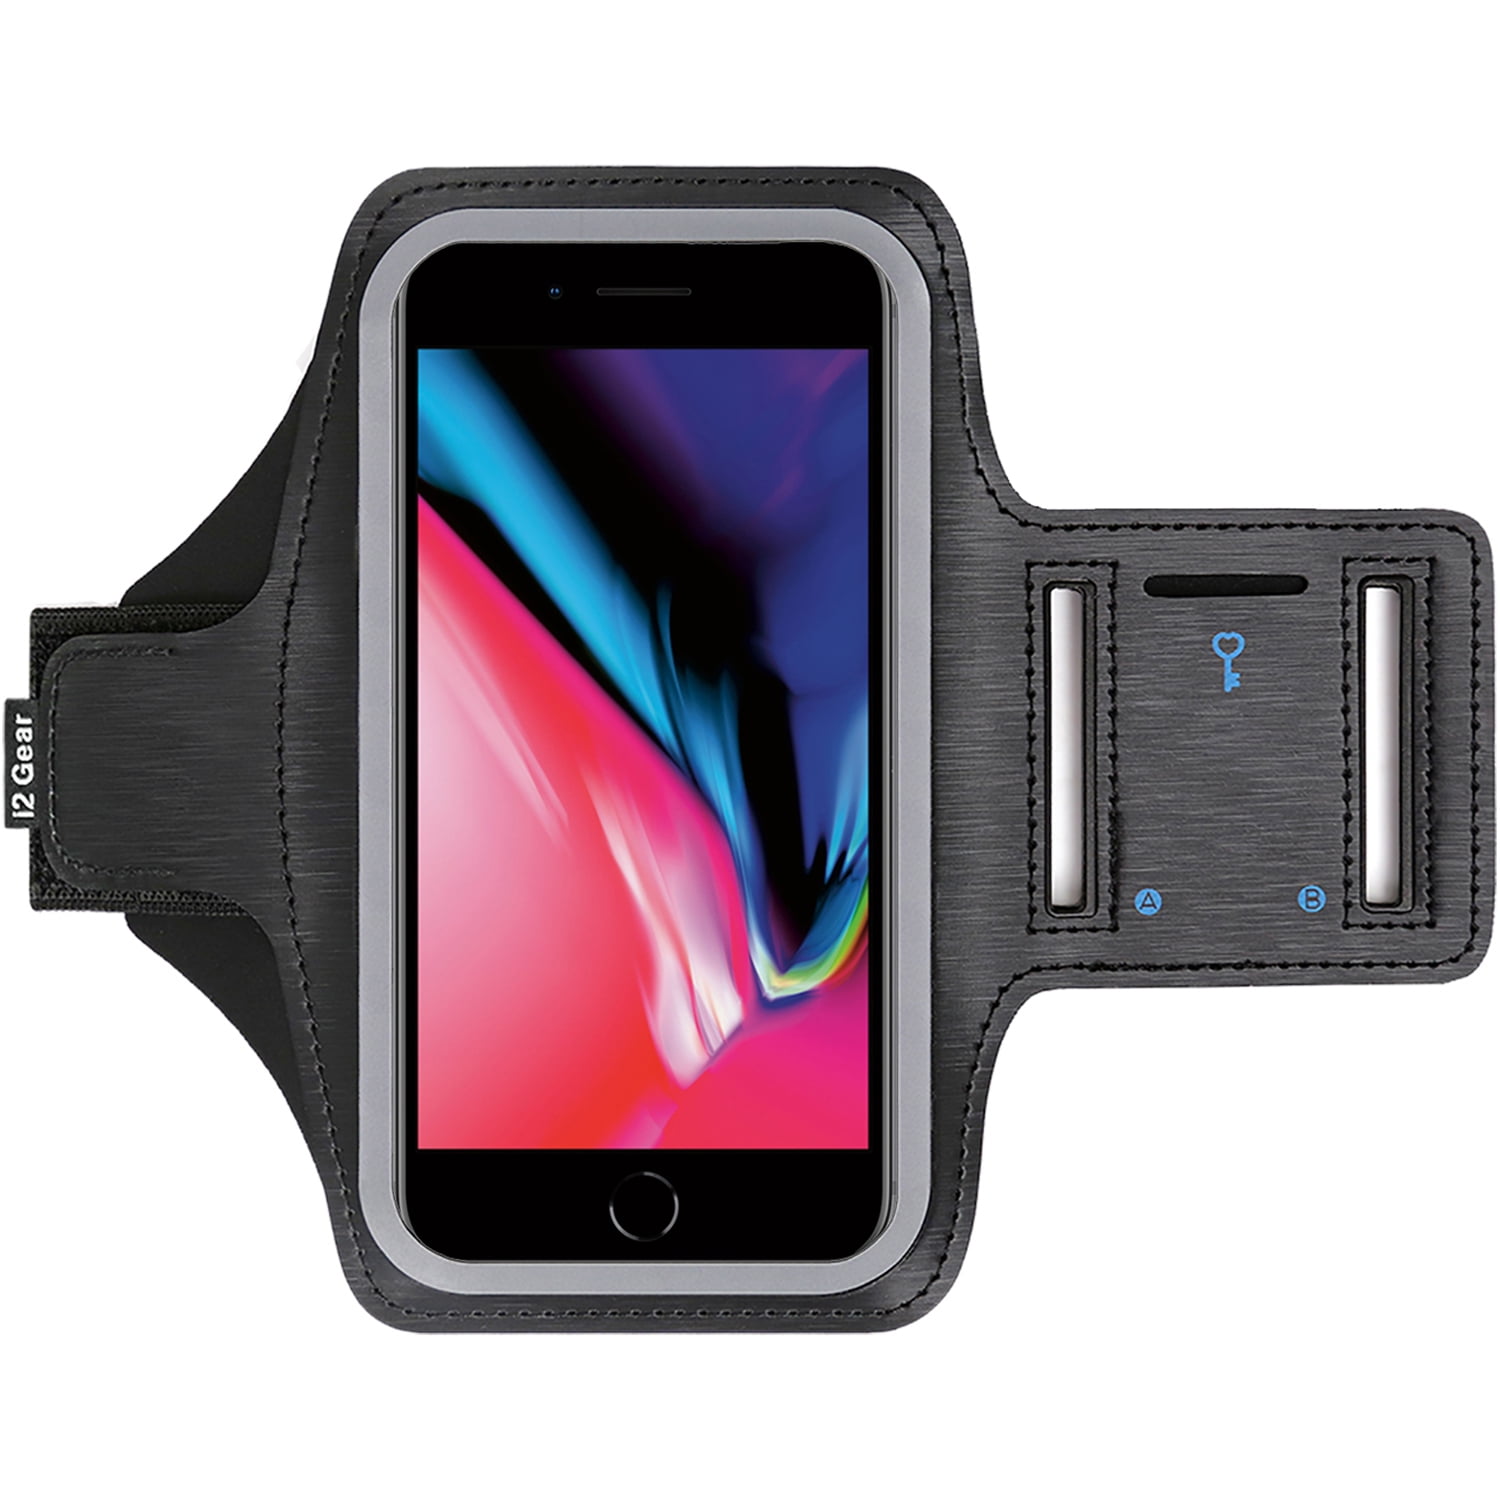 Sports Armband Compatible with iPhone 8 Plus Forearm Sports Wristband Compatible with iPhone 8 Plus Running with Pocket for Keys Card Cable Black 